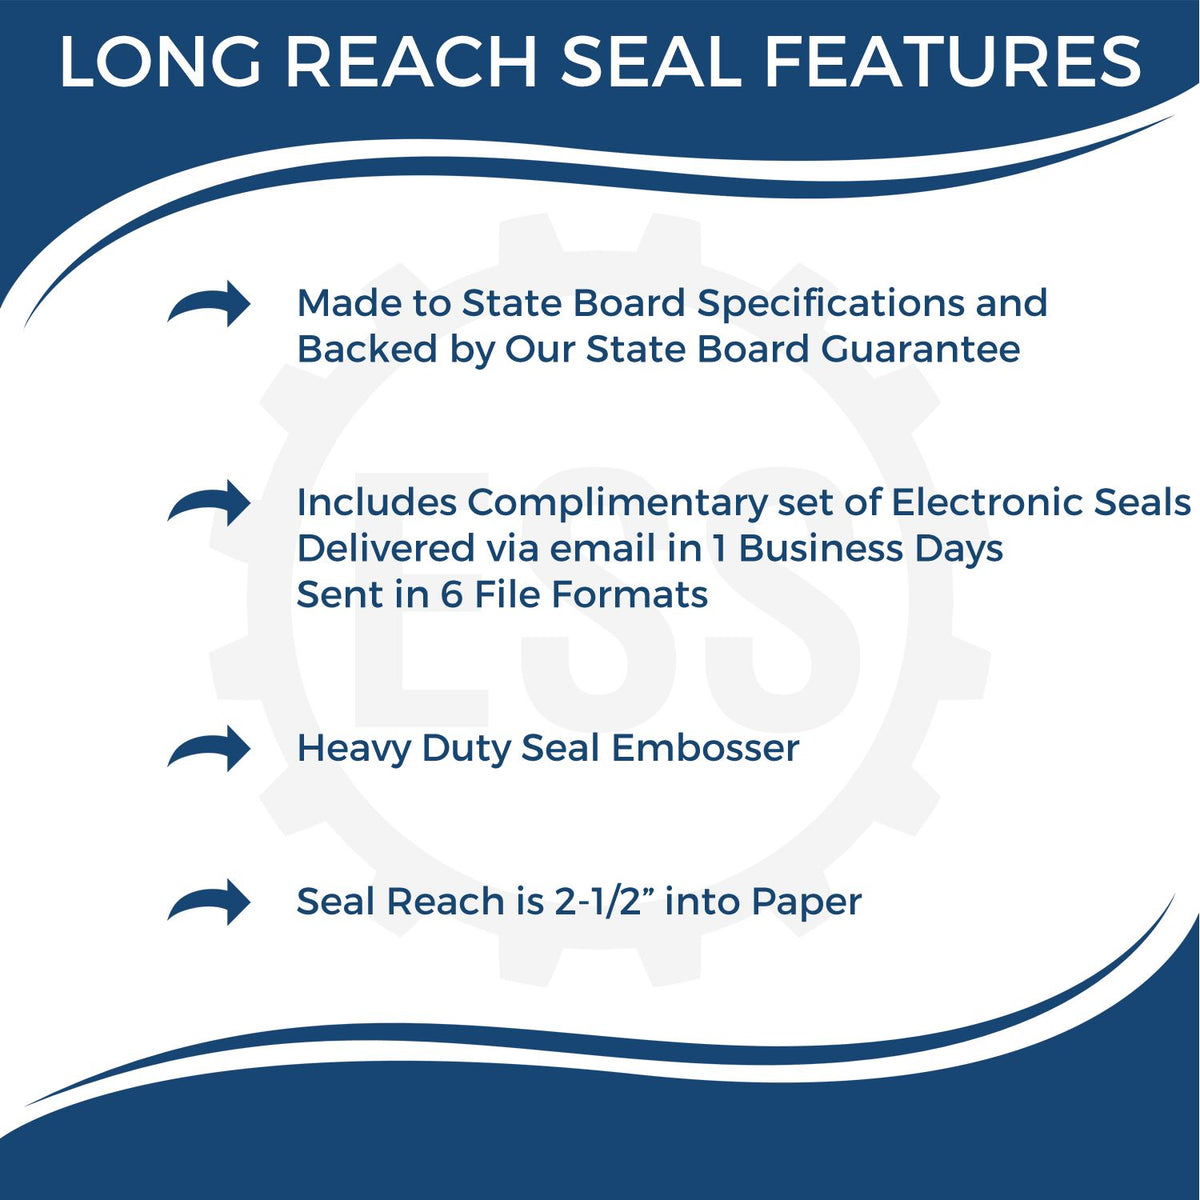 A picture of an infographic highlighting the selling points for the Long Reach Michigan Geology Seal